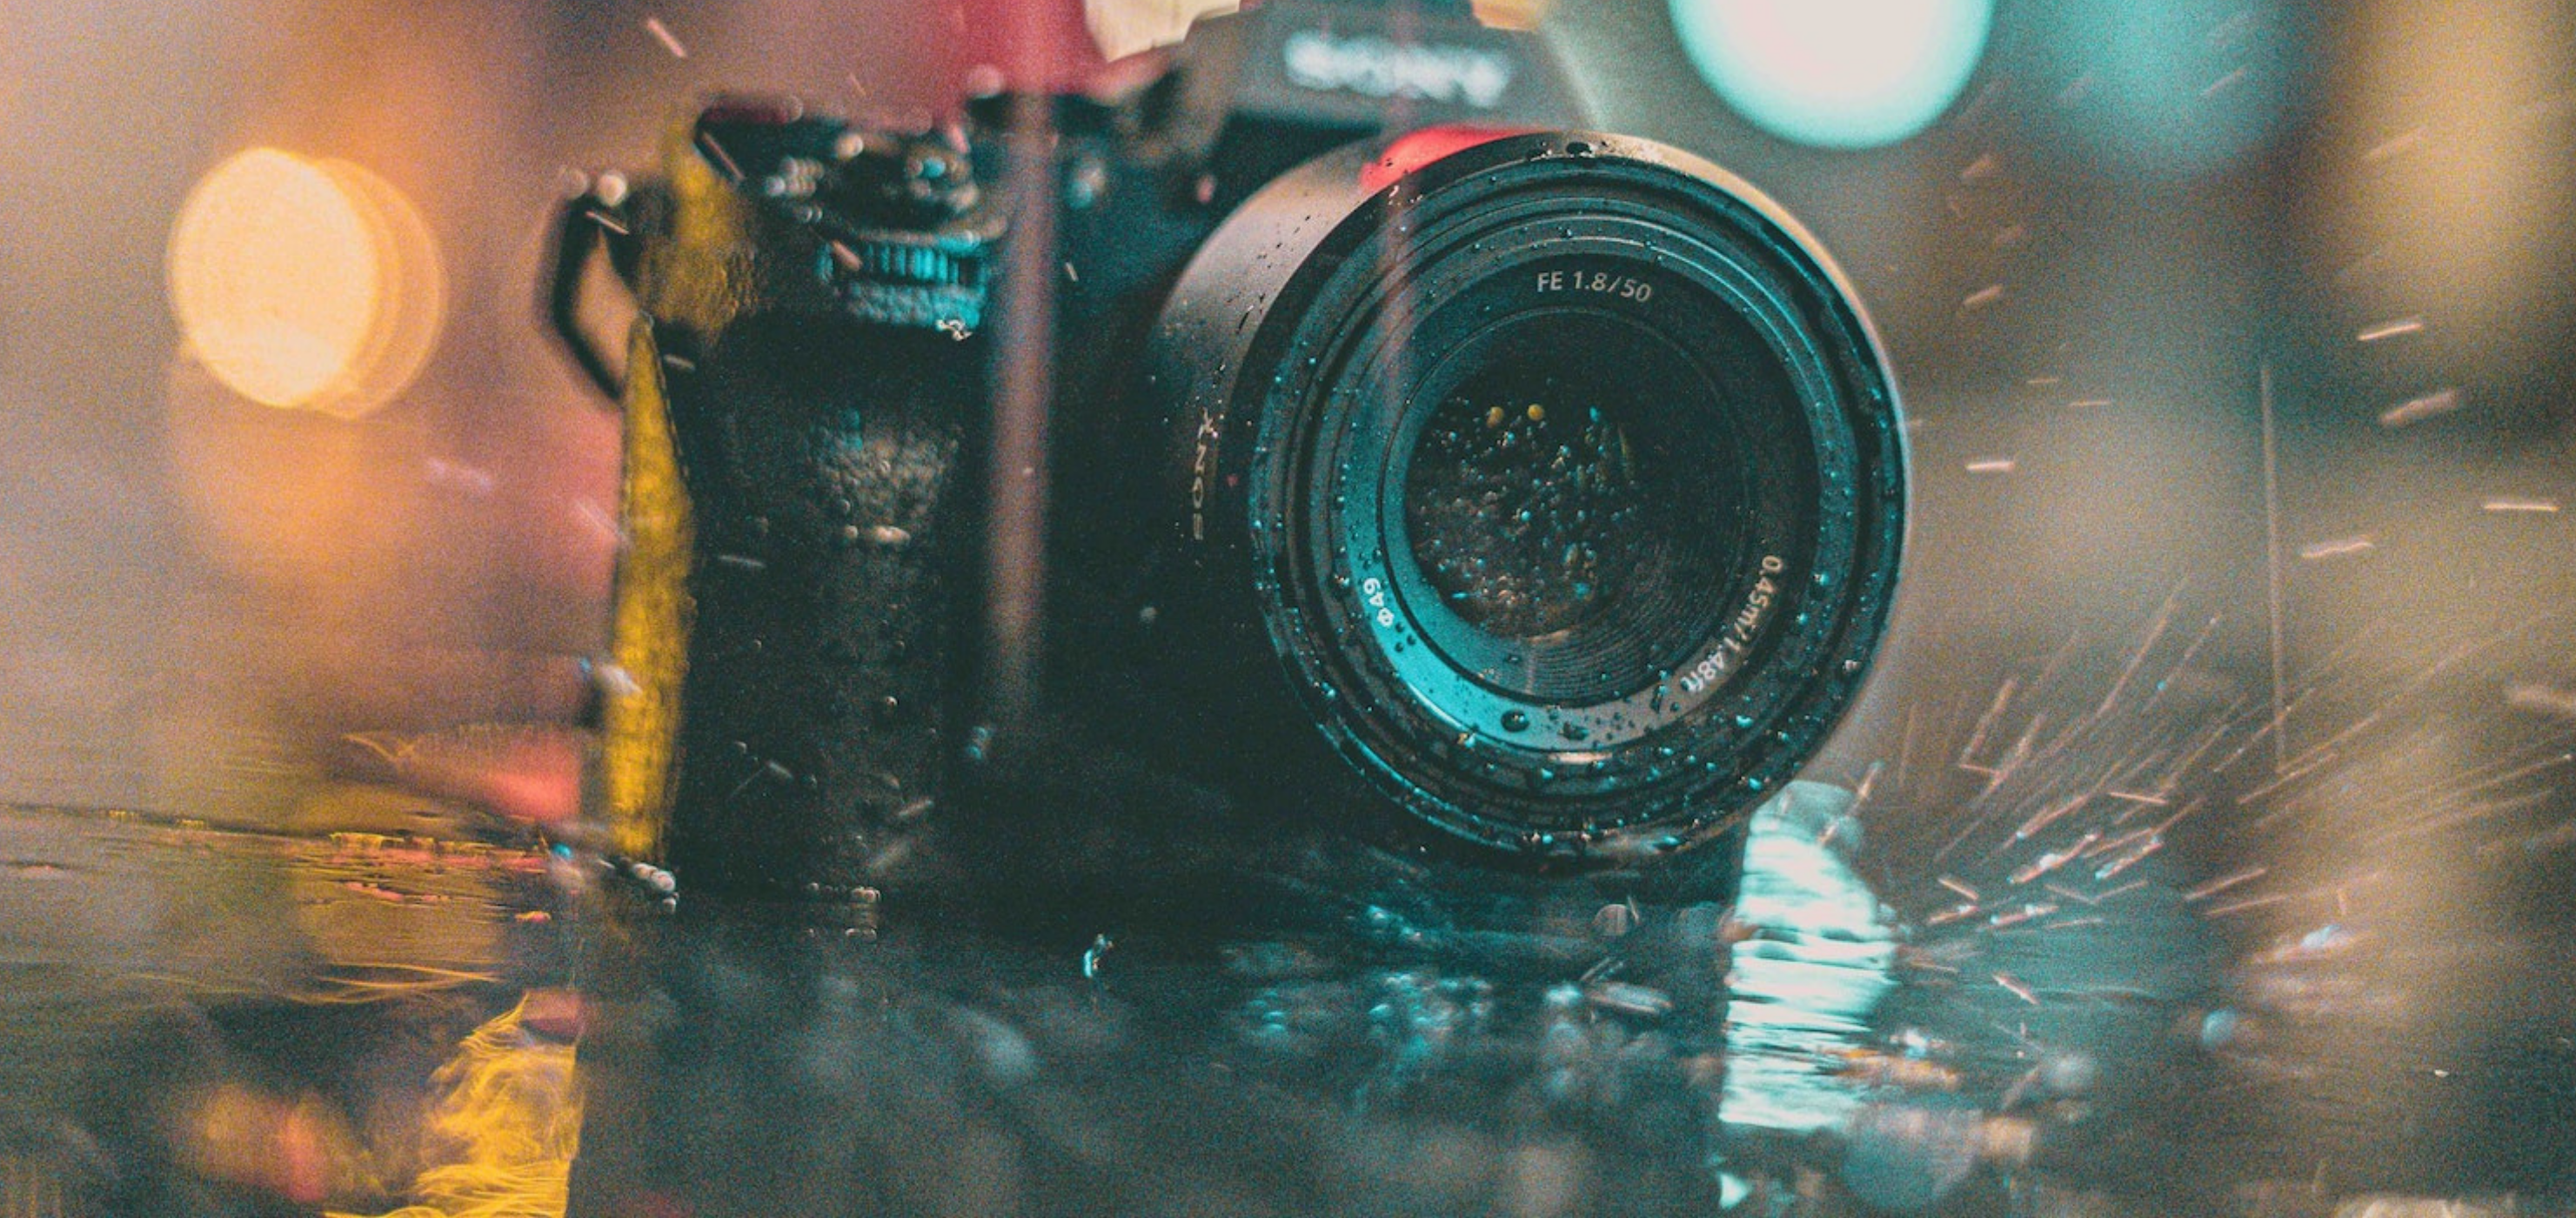 Photographing in the Rain: 8 Things to Photograph on Rainy Days